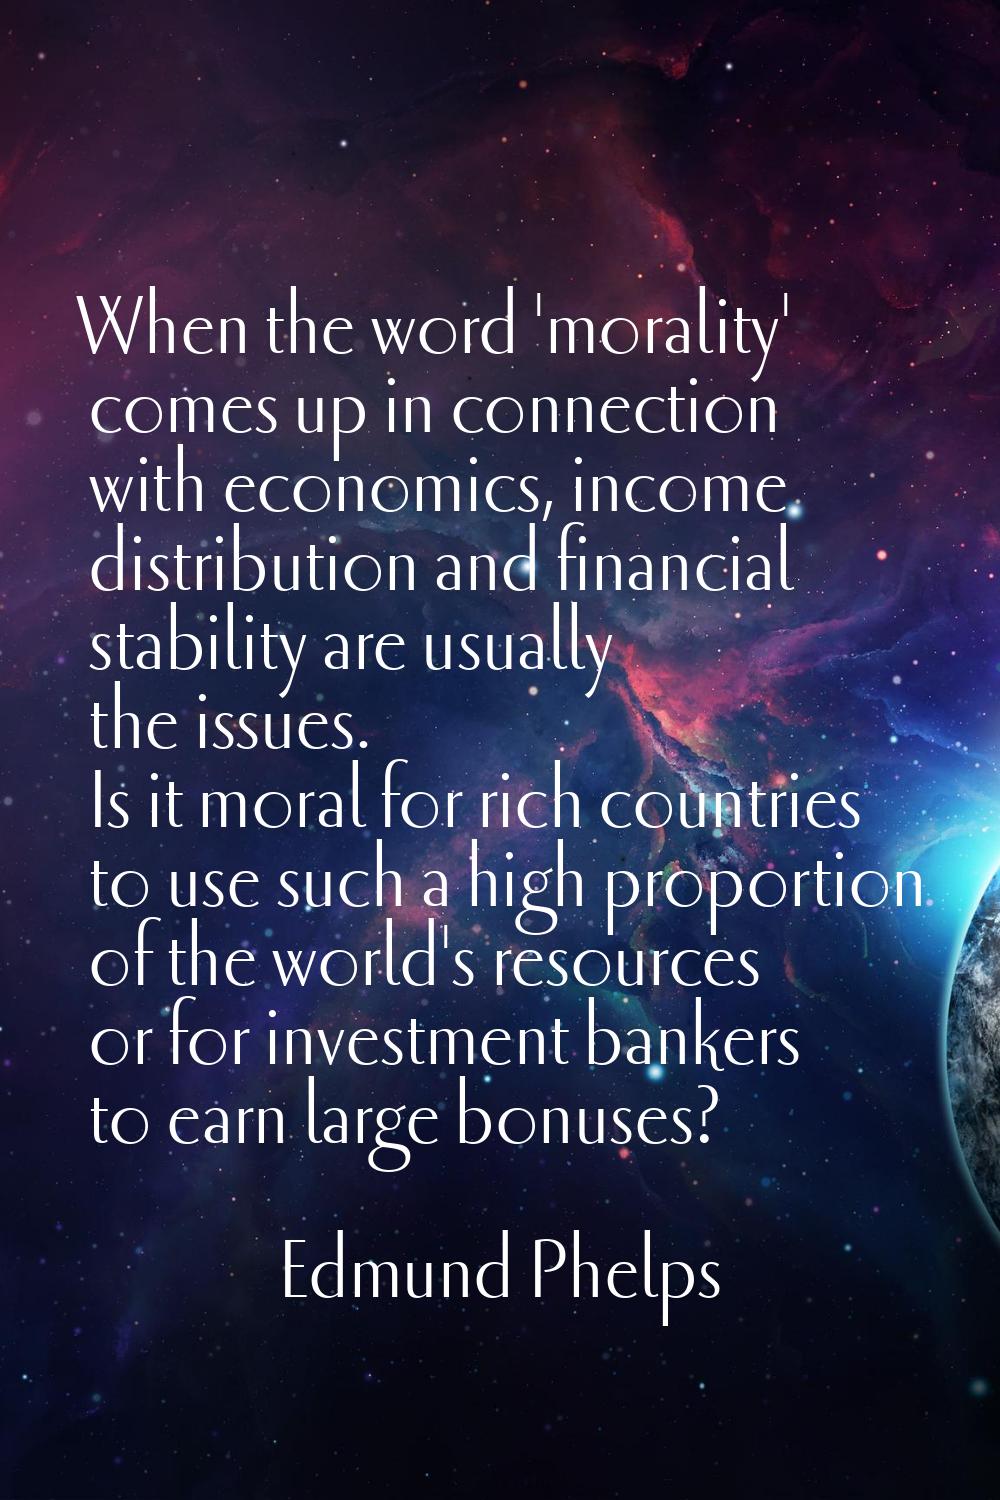 When the word 'morality' comes up in connection with economics, income distribution and financial s